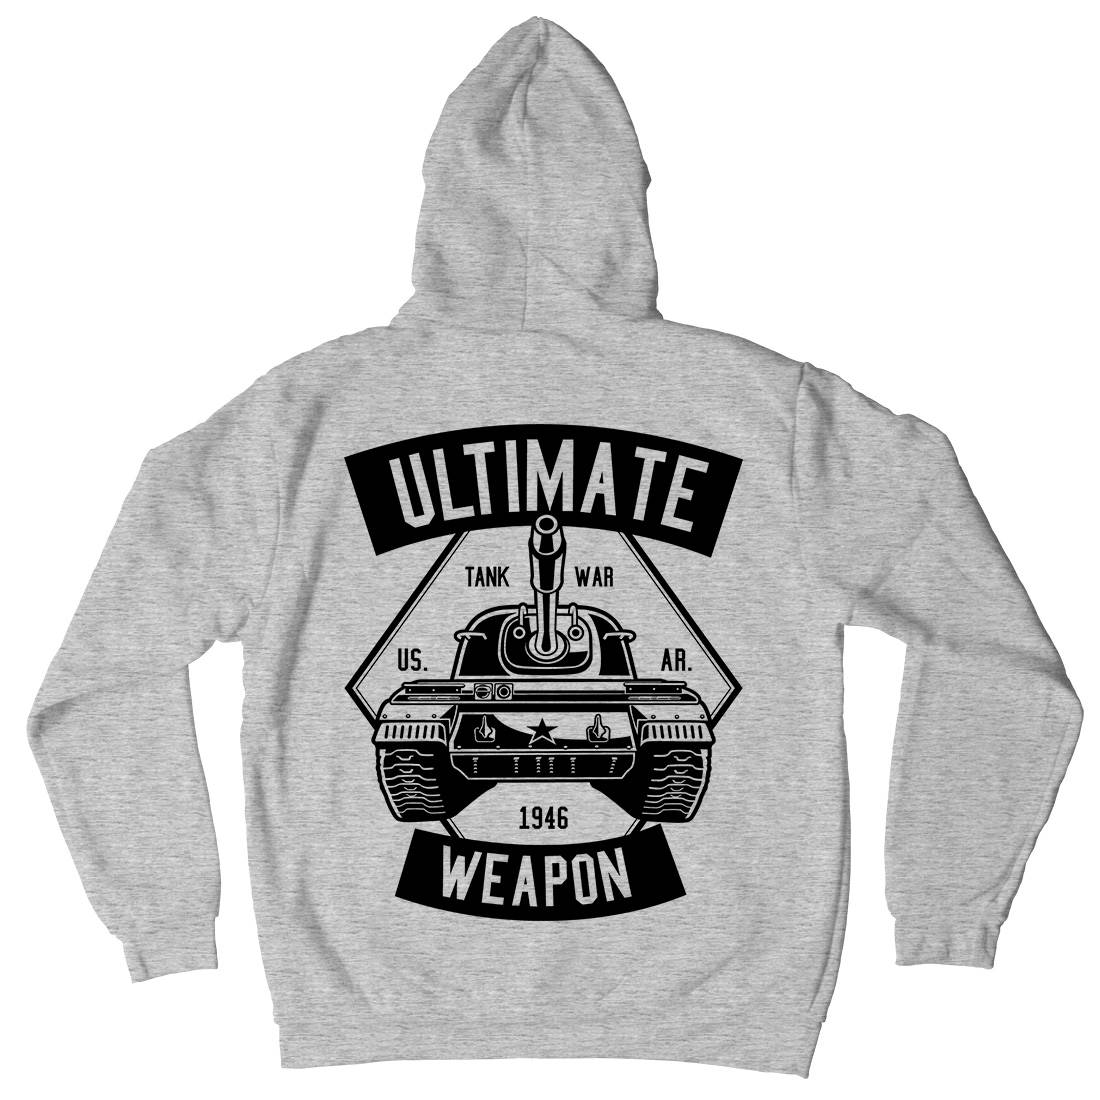 Tank War Ultimate Weapon Mens Hoodie With Pocket Army B649